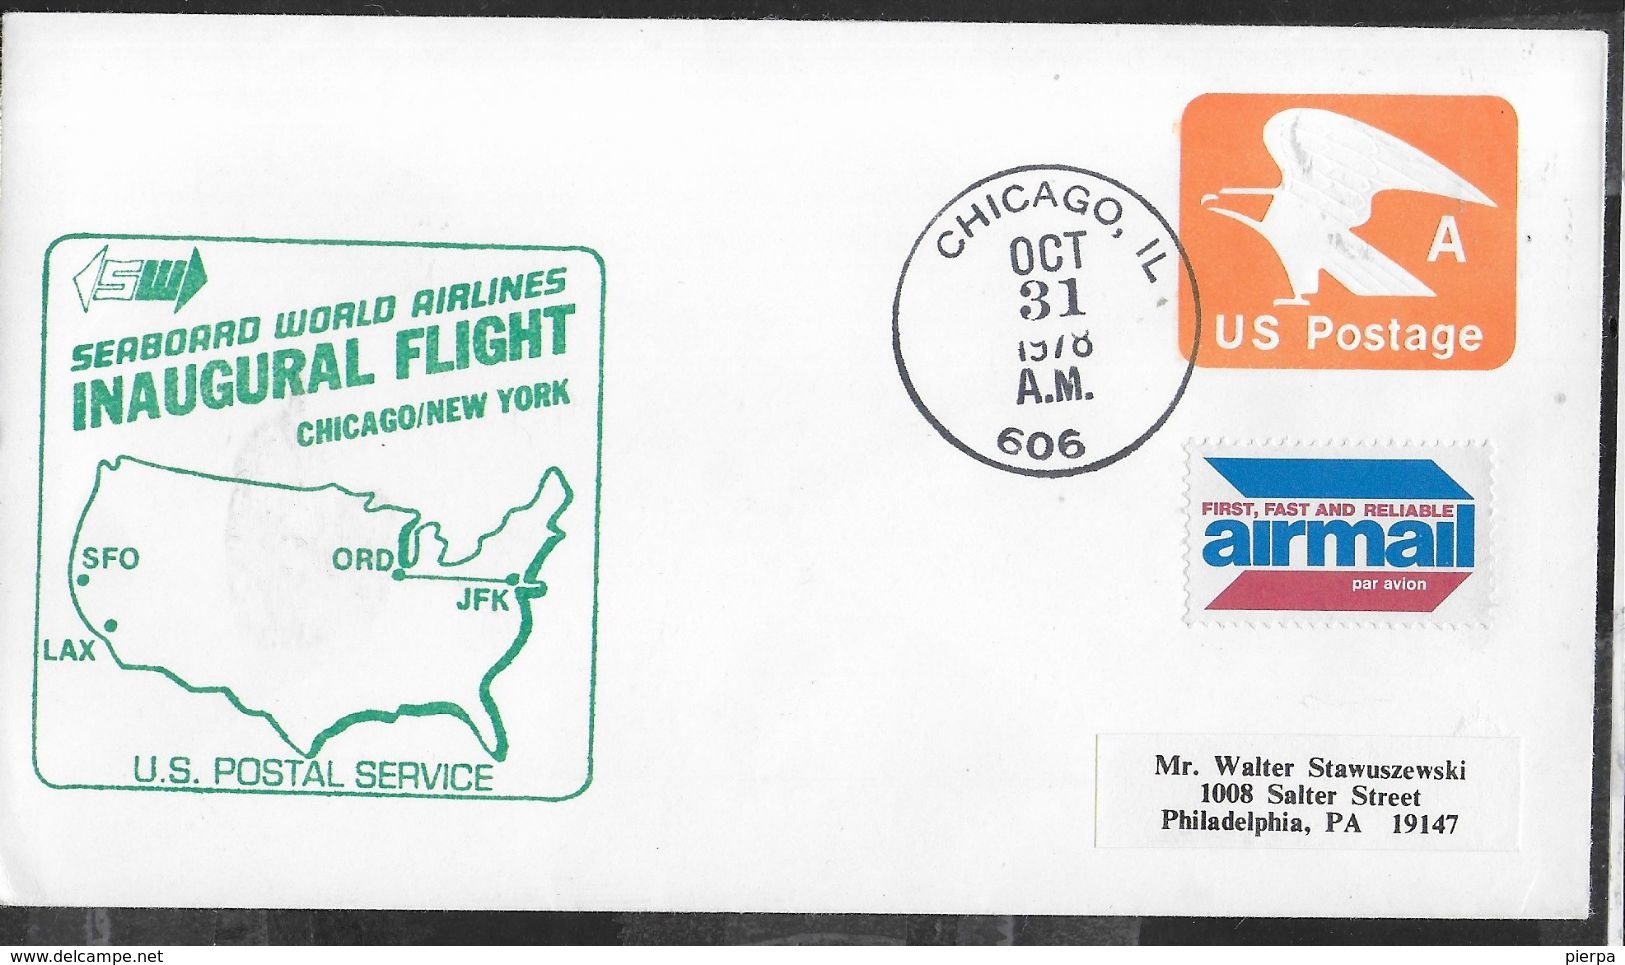 U.S.A. - SERBOARD WORLD AIRLINES INAUGURAL FLIGHT - CHICAGO- NEW YORK - OCT 31.1978 - SU BUSTA POSTALE (SC.580) - Other & Unclassified